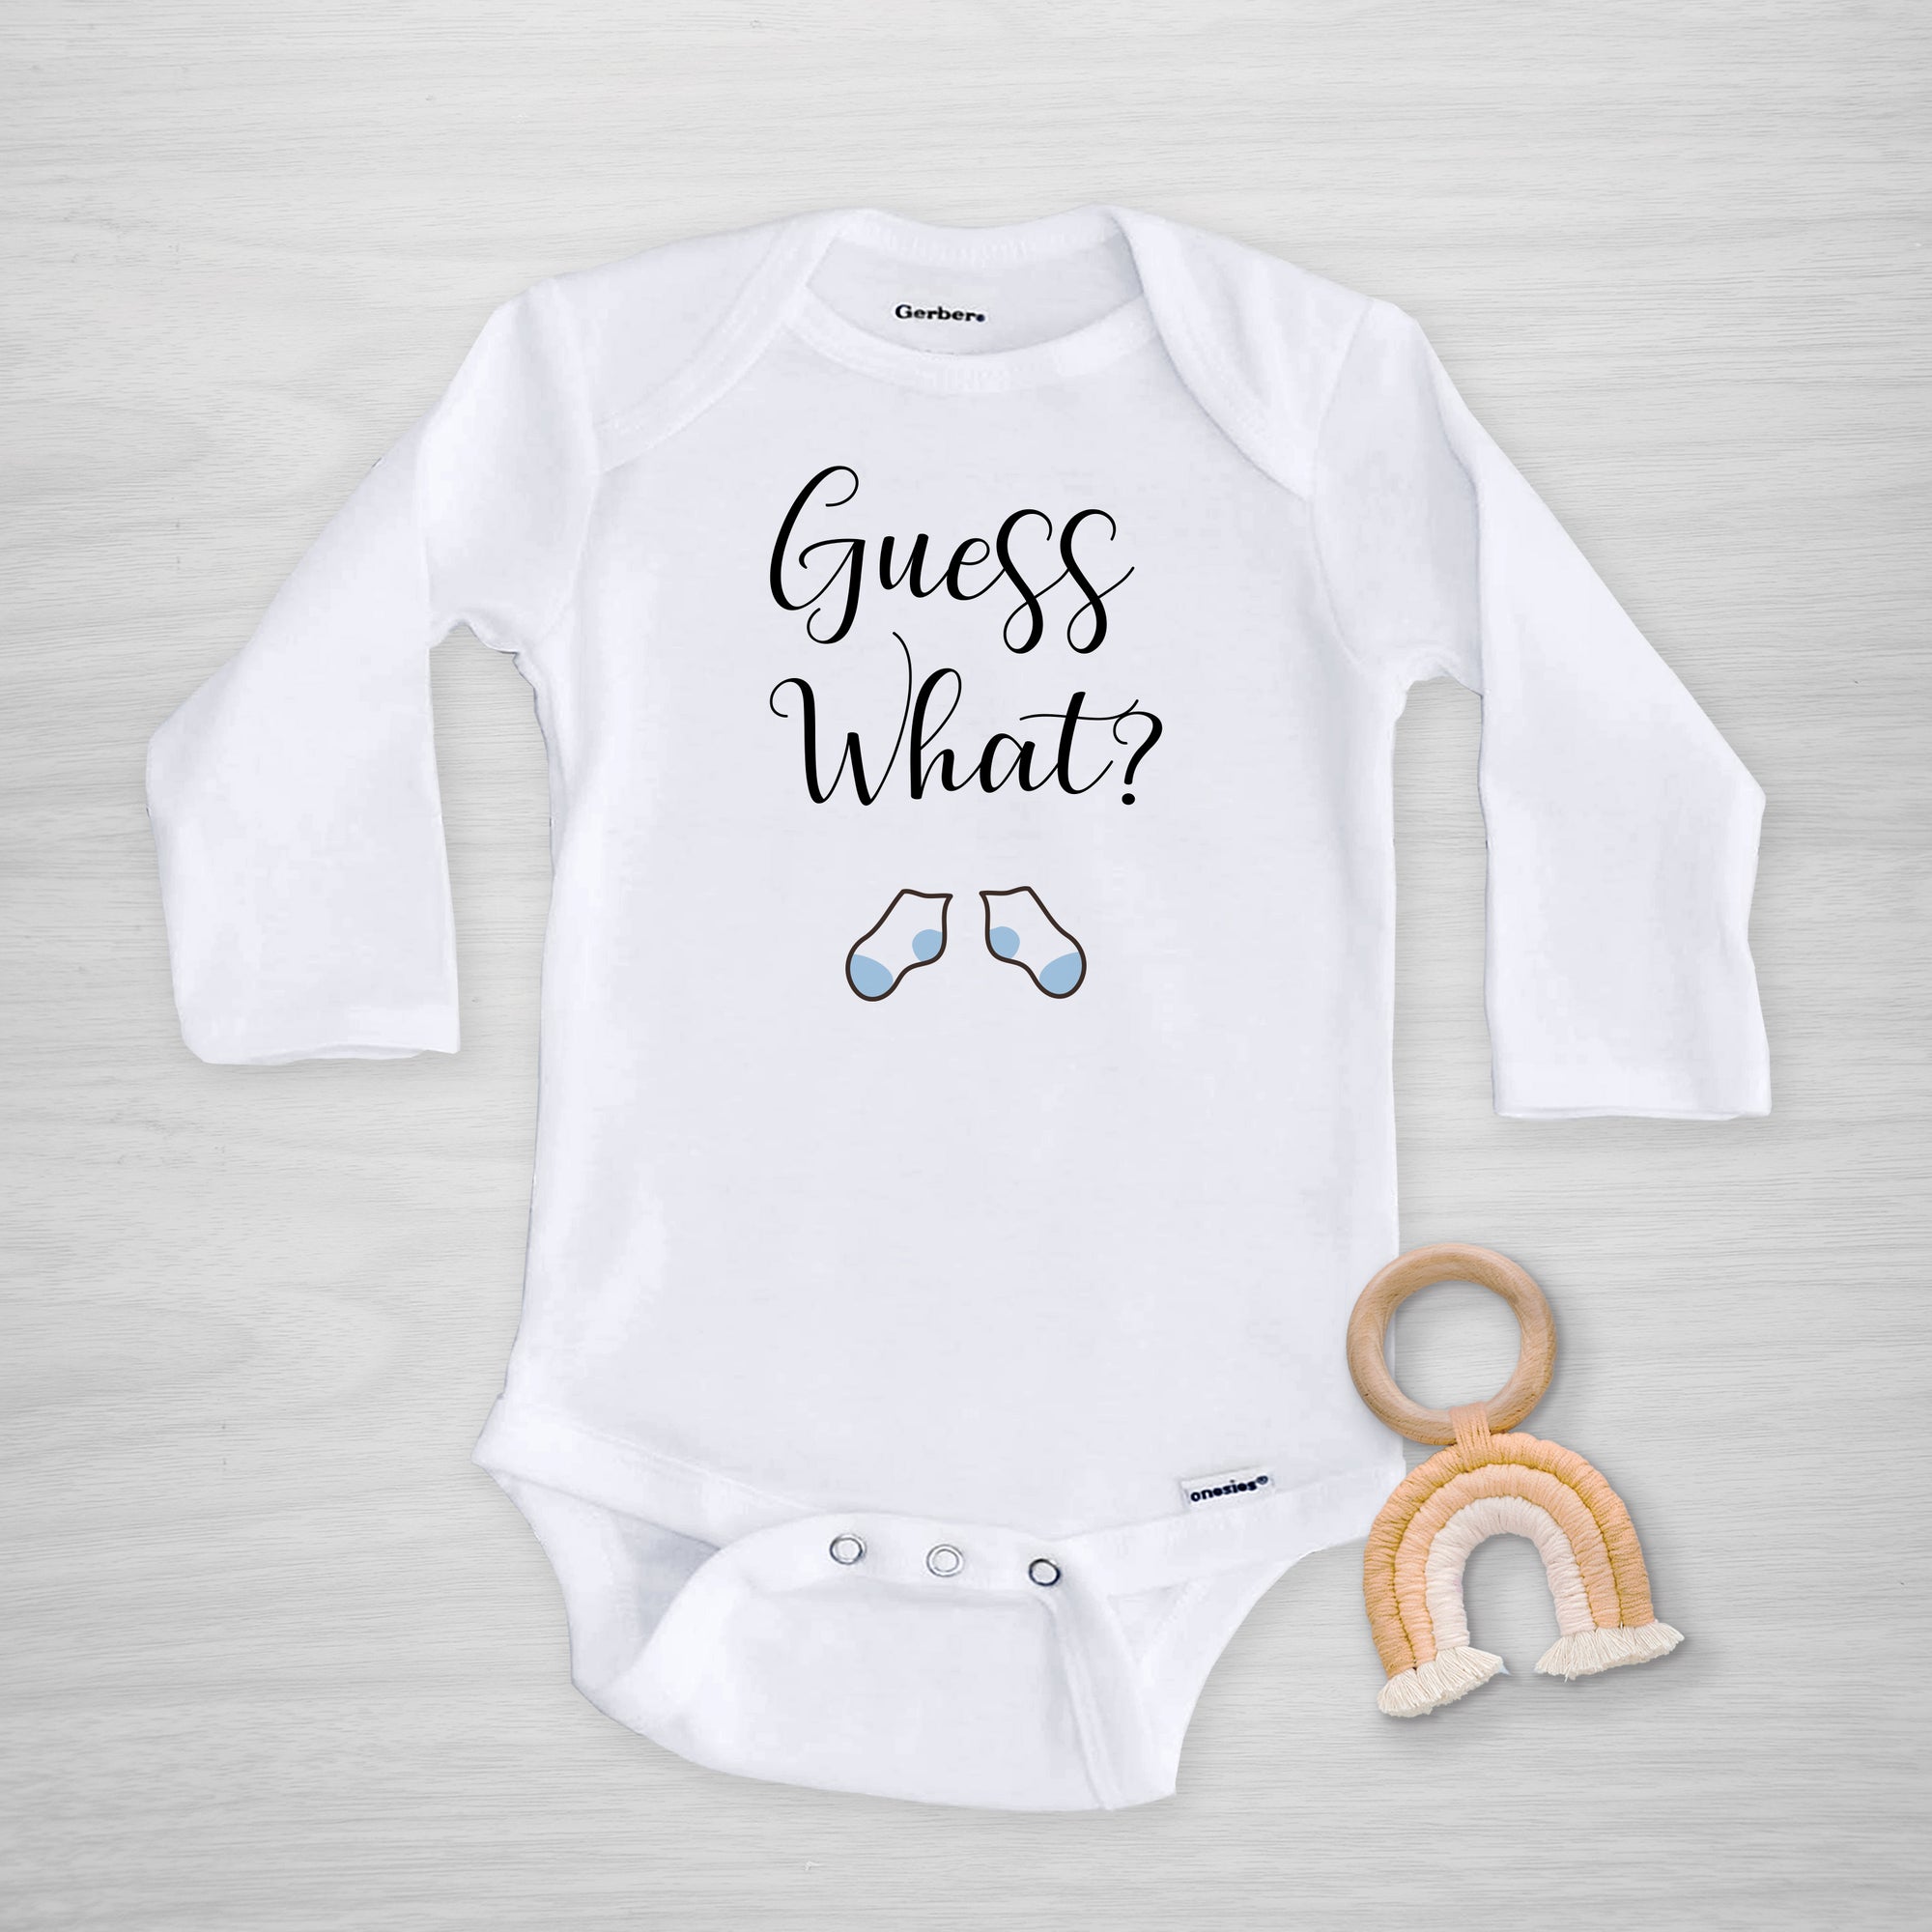 Guess What Pregnancy Announcement Gerber Onesie with blue socks, Pipsy.com, short sleeved